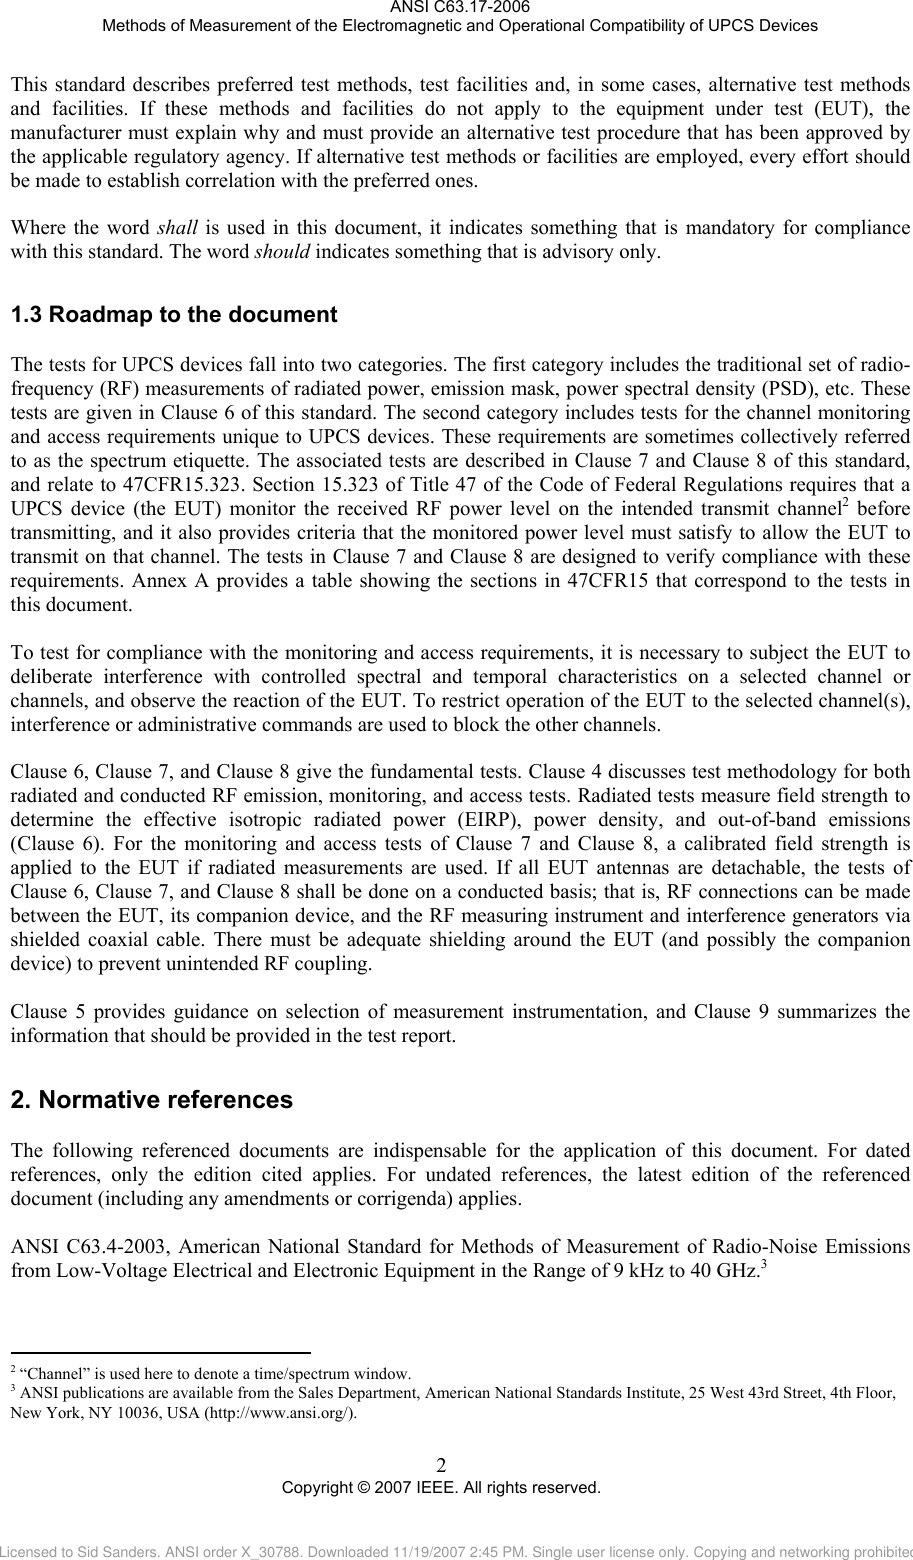 ANSI C63.17-2006 Methods of Measurement of the Electromagnetic and Operational Compatibility of UPCS Devices This standard describes preferred test methods, test facilities and, in some cases, alternative test methods and facilities. If these methods and facilities do not apply to the equipment under test (EUT), the manufacturer must explain why and must provide an alternative test procedure that has been approved by the applicable regulatory agency. If alternative test methods or facilities are employed, every effort should be made to establish correlation with the preferred ones.  Where the word shall is used in this document, it indicates something that is mandatory for compliance with this standard. The word should indicates something that is advisory only. 1.32.                                                  Roadmap to the document The tests for UPCS devices fall into two categories. The first category includes the traditional set of radio-frequency (RF) measurements of radiated power, emission mask, power spectral density (PSD), etc. These tests are given in Clause 6 of this standard. The second category includes tests for the channel monitoring and access requirements unique to UPCS devices. These requirements are sometimes collectively referred to as the spectrum etiquette. The associated tests are described in Clause 7 and Clause 8 of this standard, and relate to 47CFR15.323. Section 15.323 of Title 47 of the Code of Federal Regulations requires that a UPCS device (the EUT) monitor the received RF power level on the intended transmit channel2 before transmitting, and it also provides criteria that the monitored power level must satisfy to allow the EUT to transmit on that channel. The tests in Clause 7 and Clause 8 are designed to verify compliance with these requirements. Annex A provides a table showing the sections in 47CFR15 that correspond to the tests in this document.  To test for compliance with the monitoring and access requirements, it is necessary to subject the EUT to deliberate interference with controlled spectral and temporal characteristics on a selected channel or channels, and observe the reaction of the EUT. To restrict operation of the EUT to the selected channel(s), interference or administrative commands are used to block the other channels.   Clause 6, Clause 7, and Clause 8 give the fundamental tests. Clause 4 discusses test methodology for both radiated and conducted RF emission, monitoring, and access tests. Radiated tests measure field strength to determine the effective isotropic radiated power (EIRP), power density, and out-of-band emissions  (Clause 6). For the monitoring and access tests of Clause 7 and Clause 8, a calibrated field strength is applied to the EUT if radiated measurements are used. If all EUT antennas are detachable, the tests of Clause 6, Clause 7, and Clause 8 shall be done on a conducted basis; that is, RF connections can be made between the EUT, its companion device, and the RF measuring instrument and interference generators via shielded coaxial cable. There must be adequate shielding around the EUT (and possibly the companion device) to prevent unintended RF coupling.   Clause 5 provides guidance on selection of measurement instrumentation, and Clause 9 summarizes the information that should be provided in the test report. Normative references The following referenced documents are indispensable for the application of this document. For dated references, only the edition cited applies. For undated references, the latest edition of the referenced document (including any amendments or corrigenda) applies.  ANSI C63.4-2003, American National Standard for Methods of Measurement of Radio-Noise Emissions from Low-Voltage Electrical and Electronic Equipment in the Range of 9 kHz to 40 GHz.3  2 “Channel” is used here to denote a time/spectrum window. 3 ANSI publications are available from the Sales Department, American National Standards Institute, 25 West 43rd Street, 4th Floor, New York, NY 10036, USA (http://www.ansi.org/). 2 Copyright © 2007 IEEE. All rights reserved. Licensed to Sid Sanders. ANSI order X_30788. Downloaded 11/19/2007 2:45 PM. Single user license only. Copying and networking prohibited.